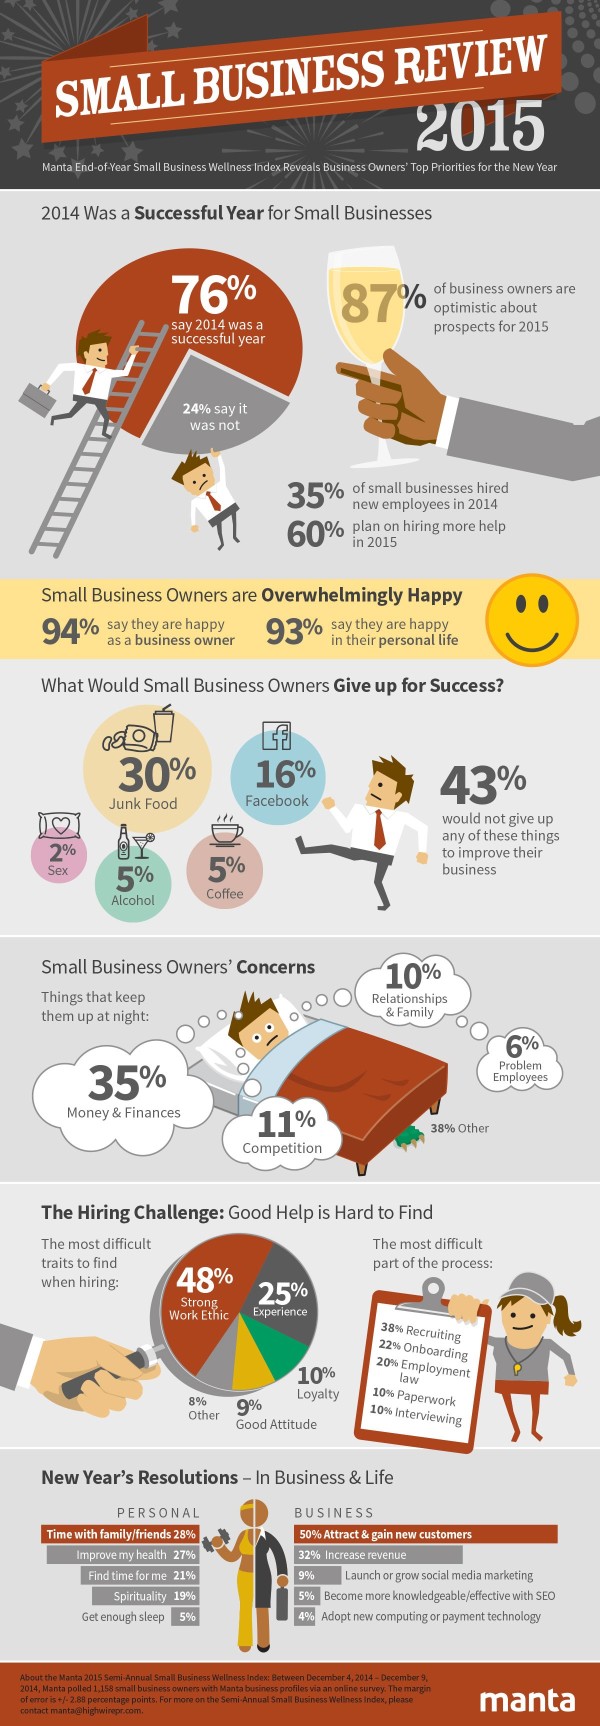 small business review